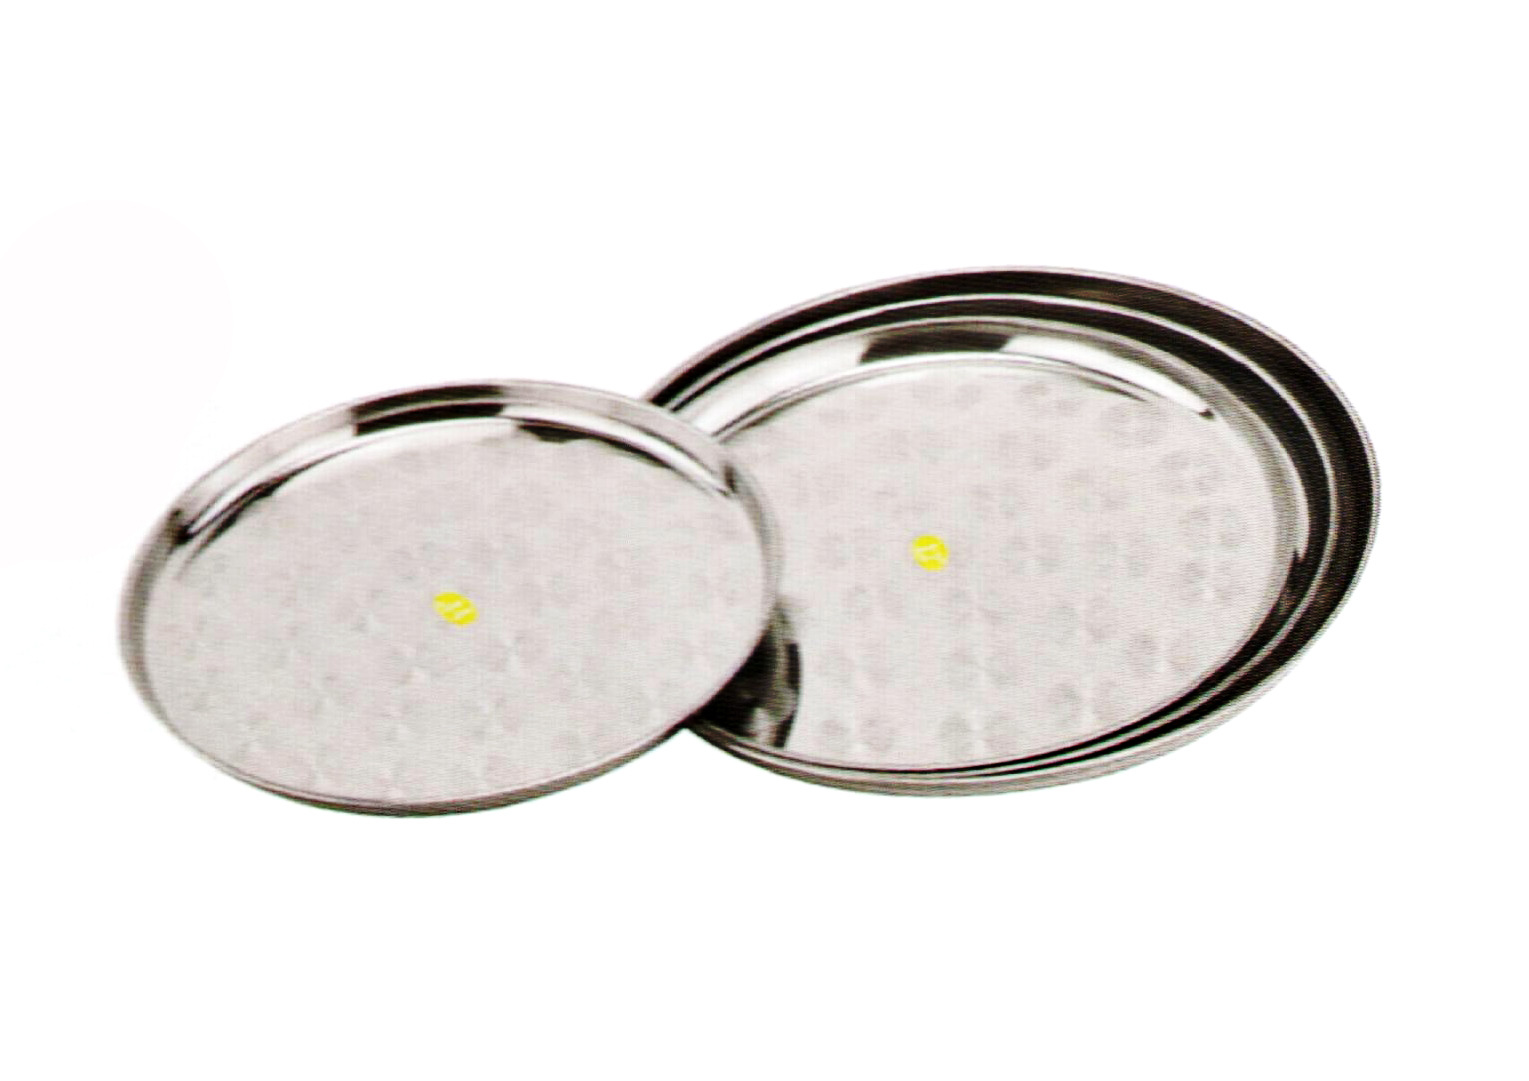 OEM/ODM China Professional Vegetable Chopper -
 Home Application Stainless Steel Kitchenware Oval Tray in Round Design Dinner Plate Sp035 – Long Prosper